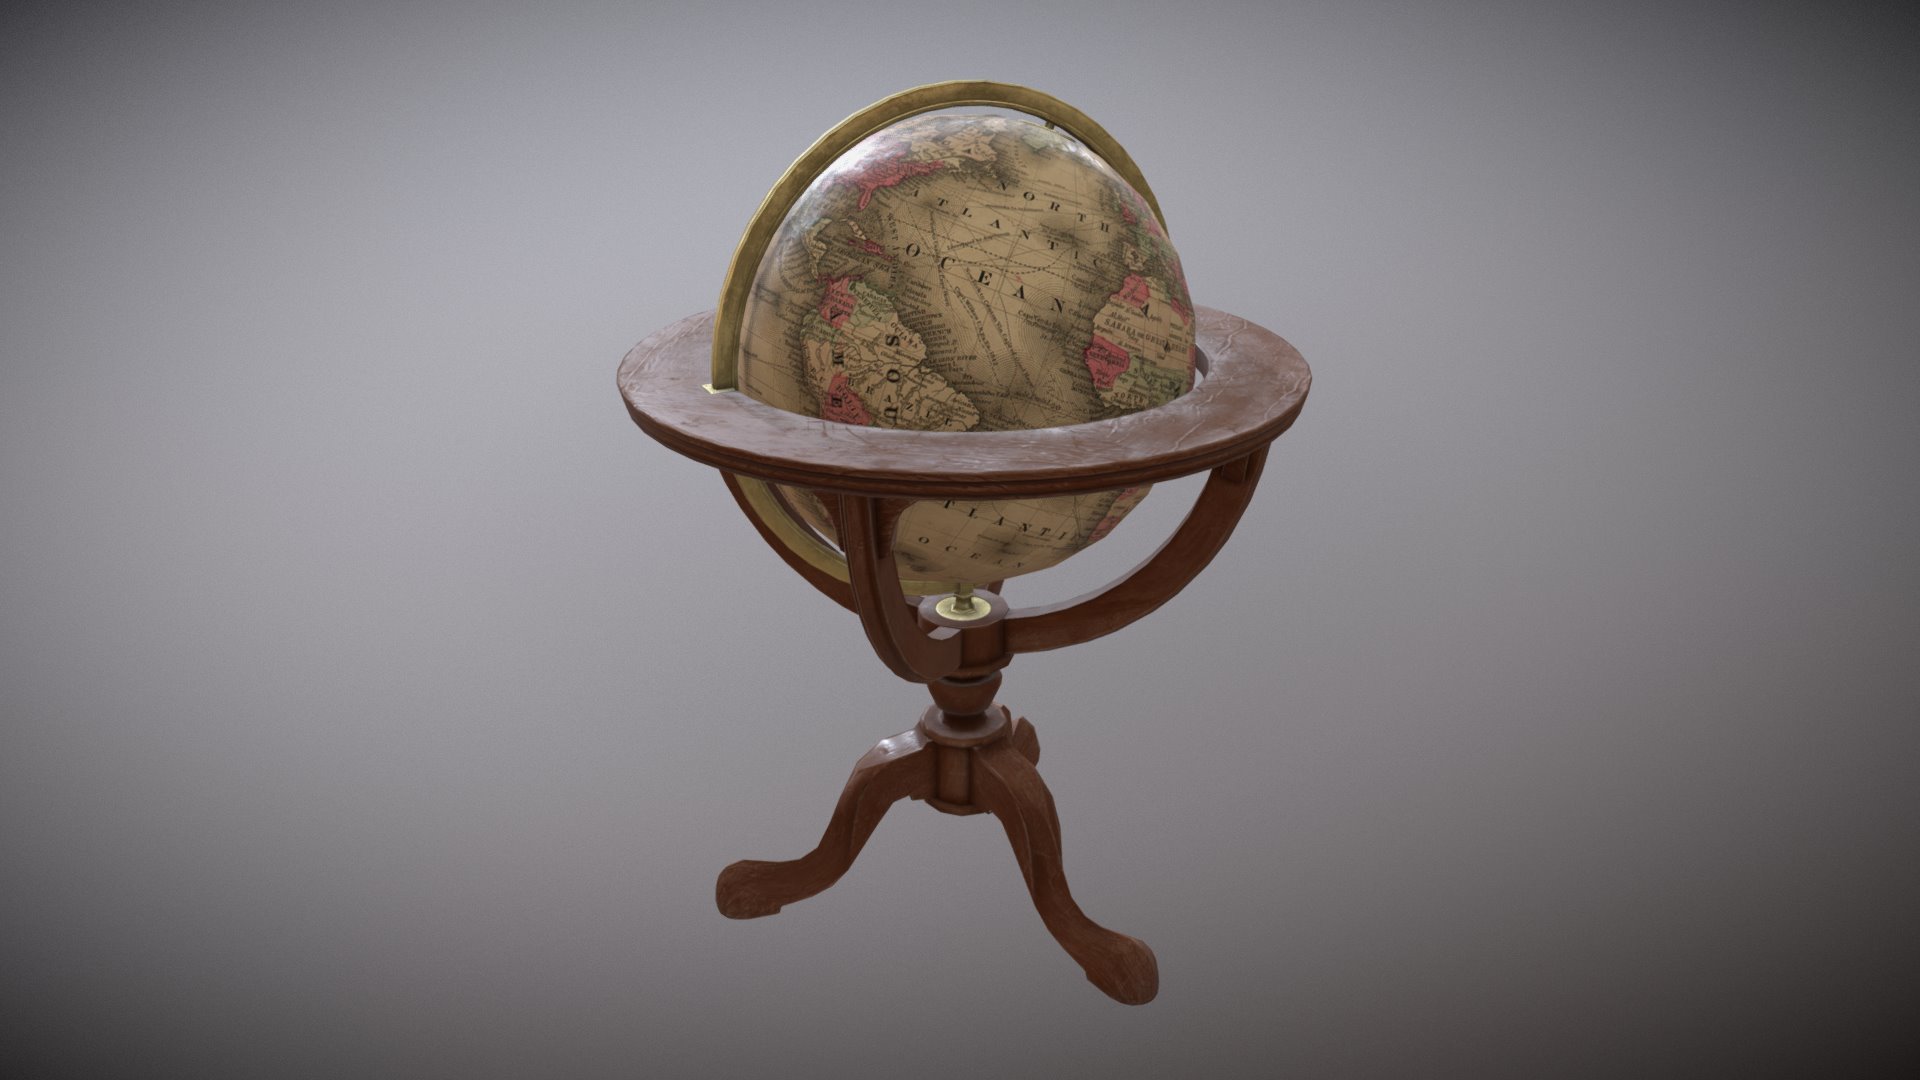 Victorian era antique globe, one of a series of props. Modelled in Maya and Zbrush, texturing in Photoshop and Quixel Suite.
See the complete scene at:  https://www.artstation.com/p/nX5xr - Antique Globe - 3D model by Benjamin (@benjammin) 3d model